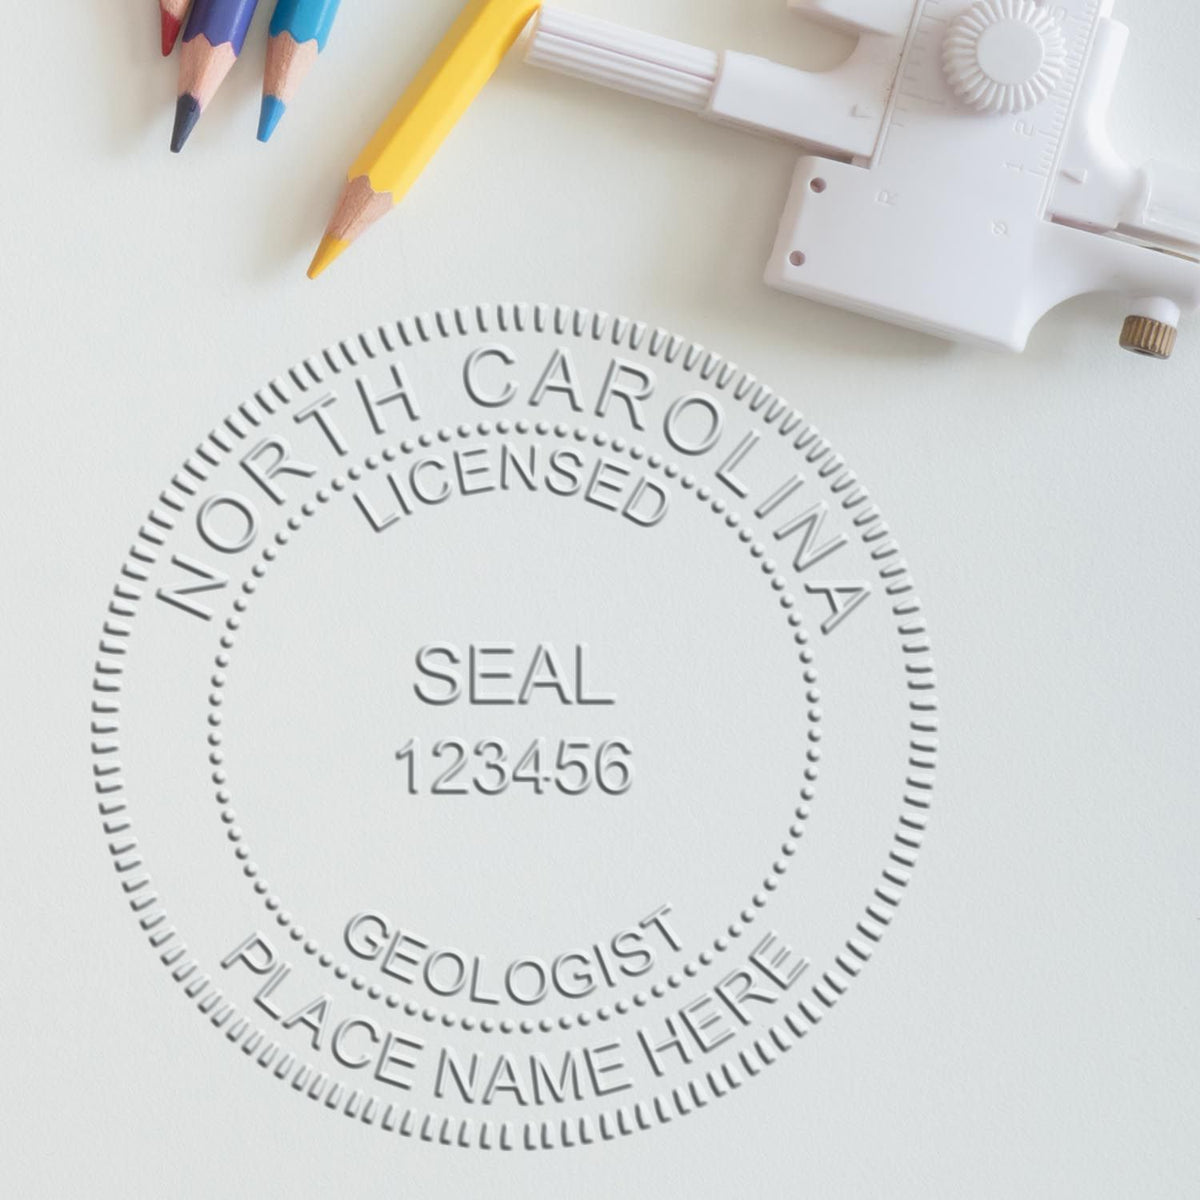 A stamped imprint of the Heavy Duty Cast Iron North Carolina Geologist Seal Embosser in this stylish lifestyle photo, setting the tone for a unique and personalized product.